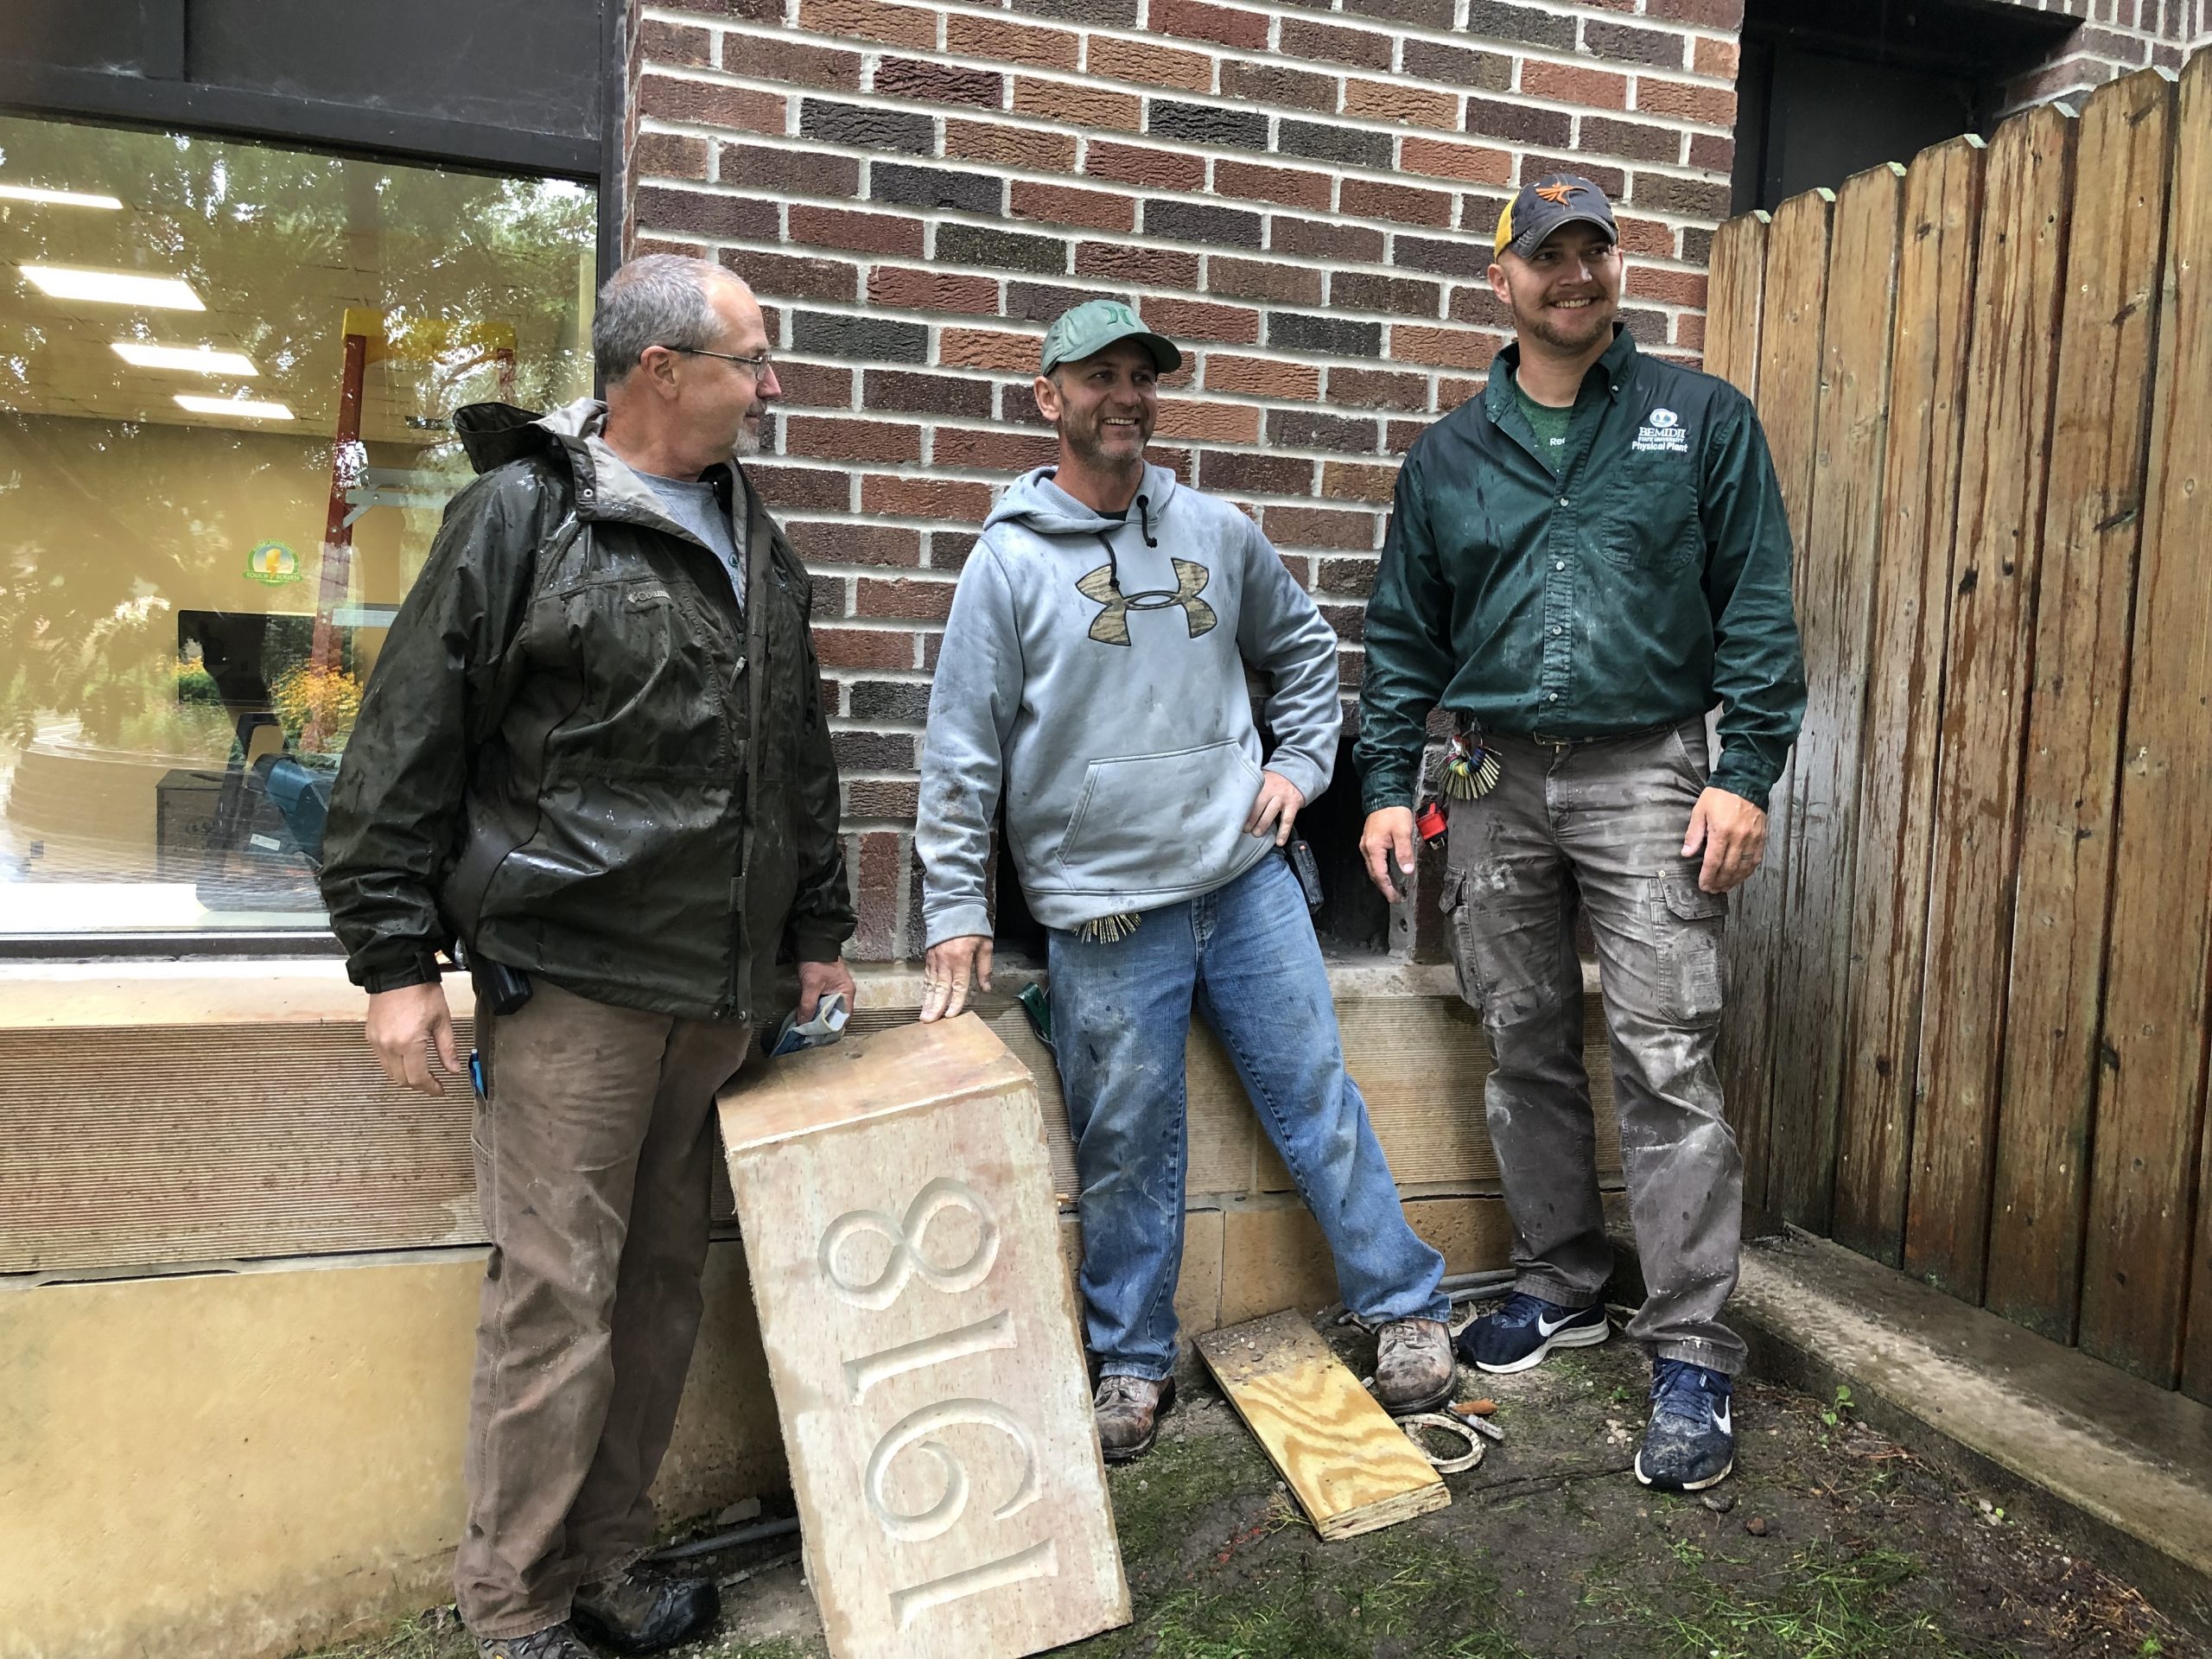 Brian Ingalls, Brent Steinmetz and Mitch Bannor pose with the Deputy Hall cornerstone after locating the time capsule.